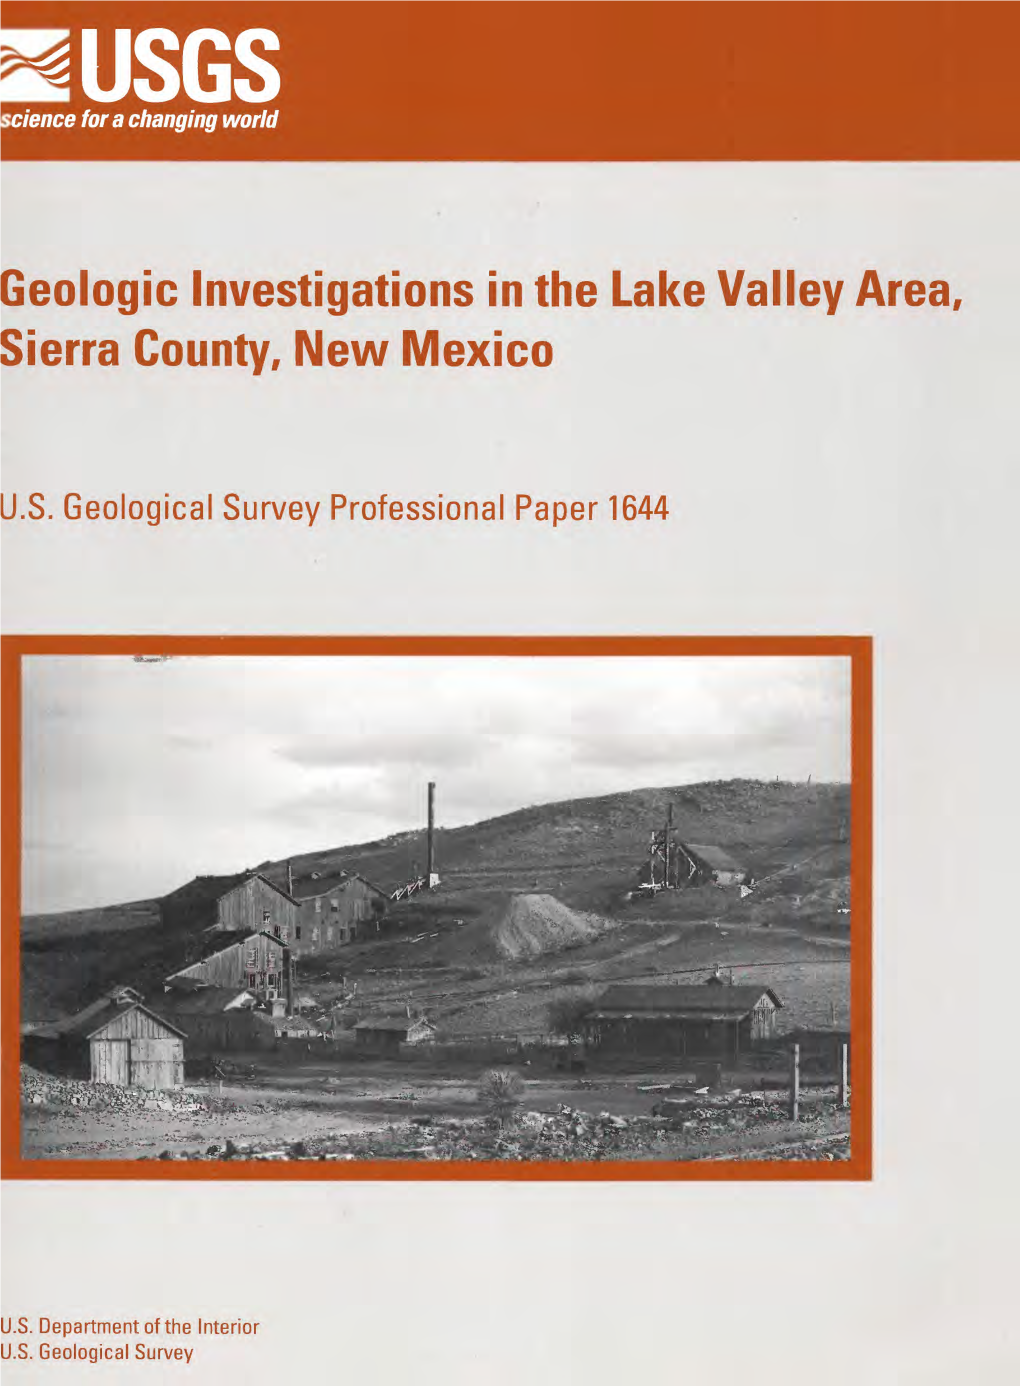 Geologic Investigations in the Lake Valley Area, Sierra County, New Mexico